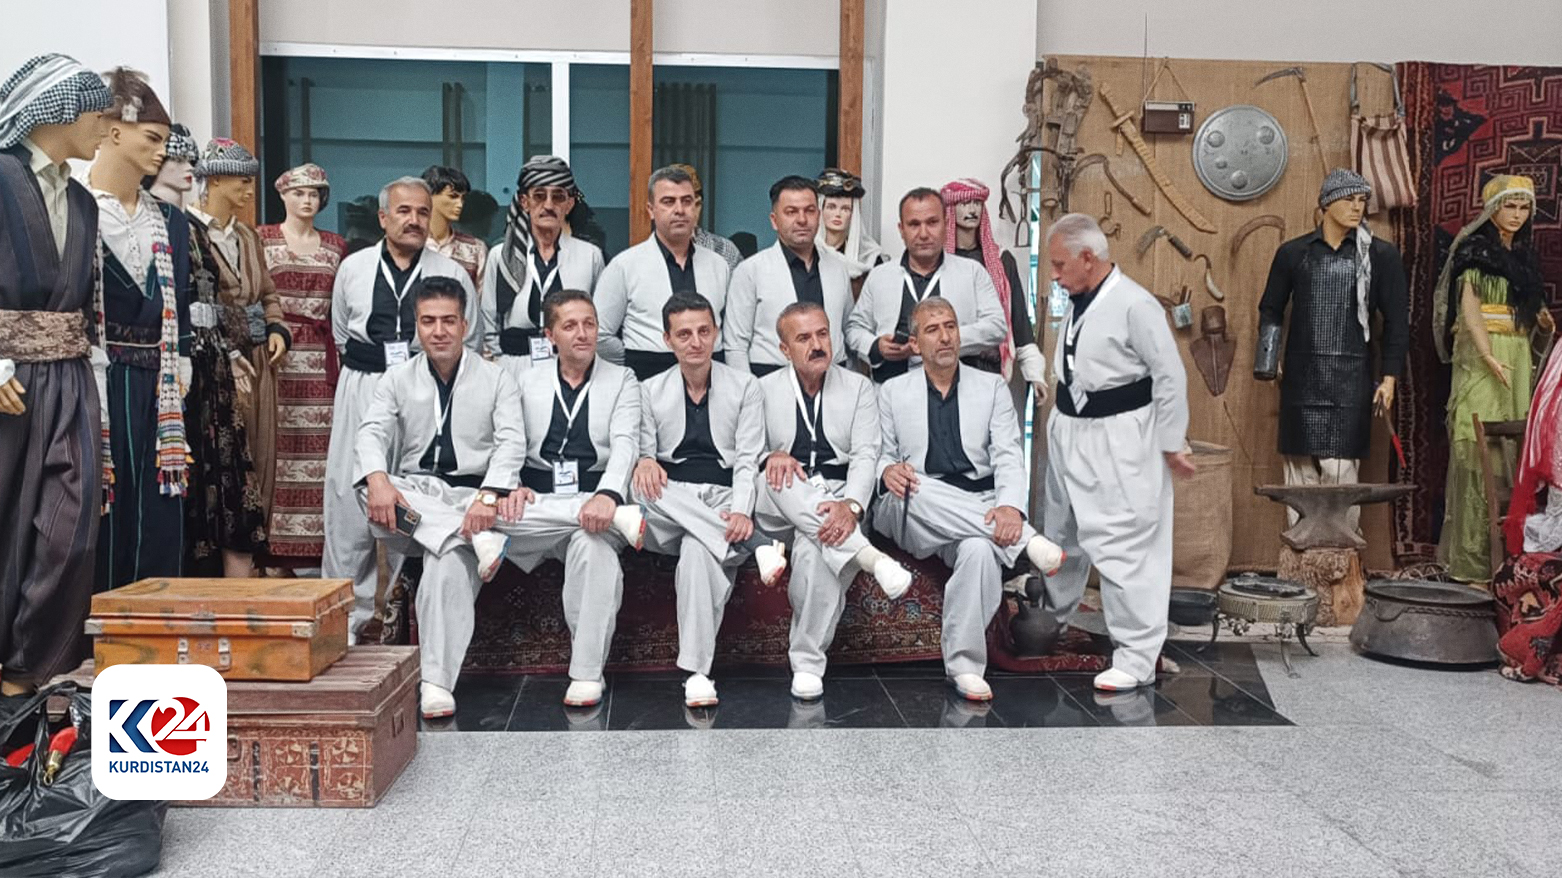 One of the dance groups participating in the Festival. (Photo: Kurdistan 24)